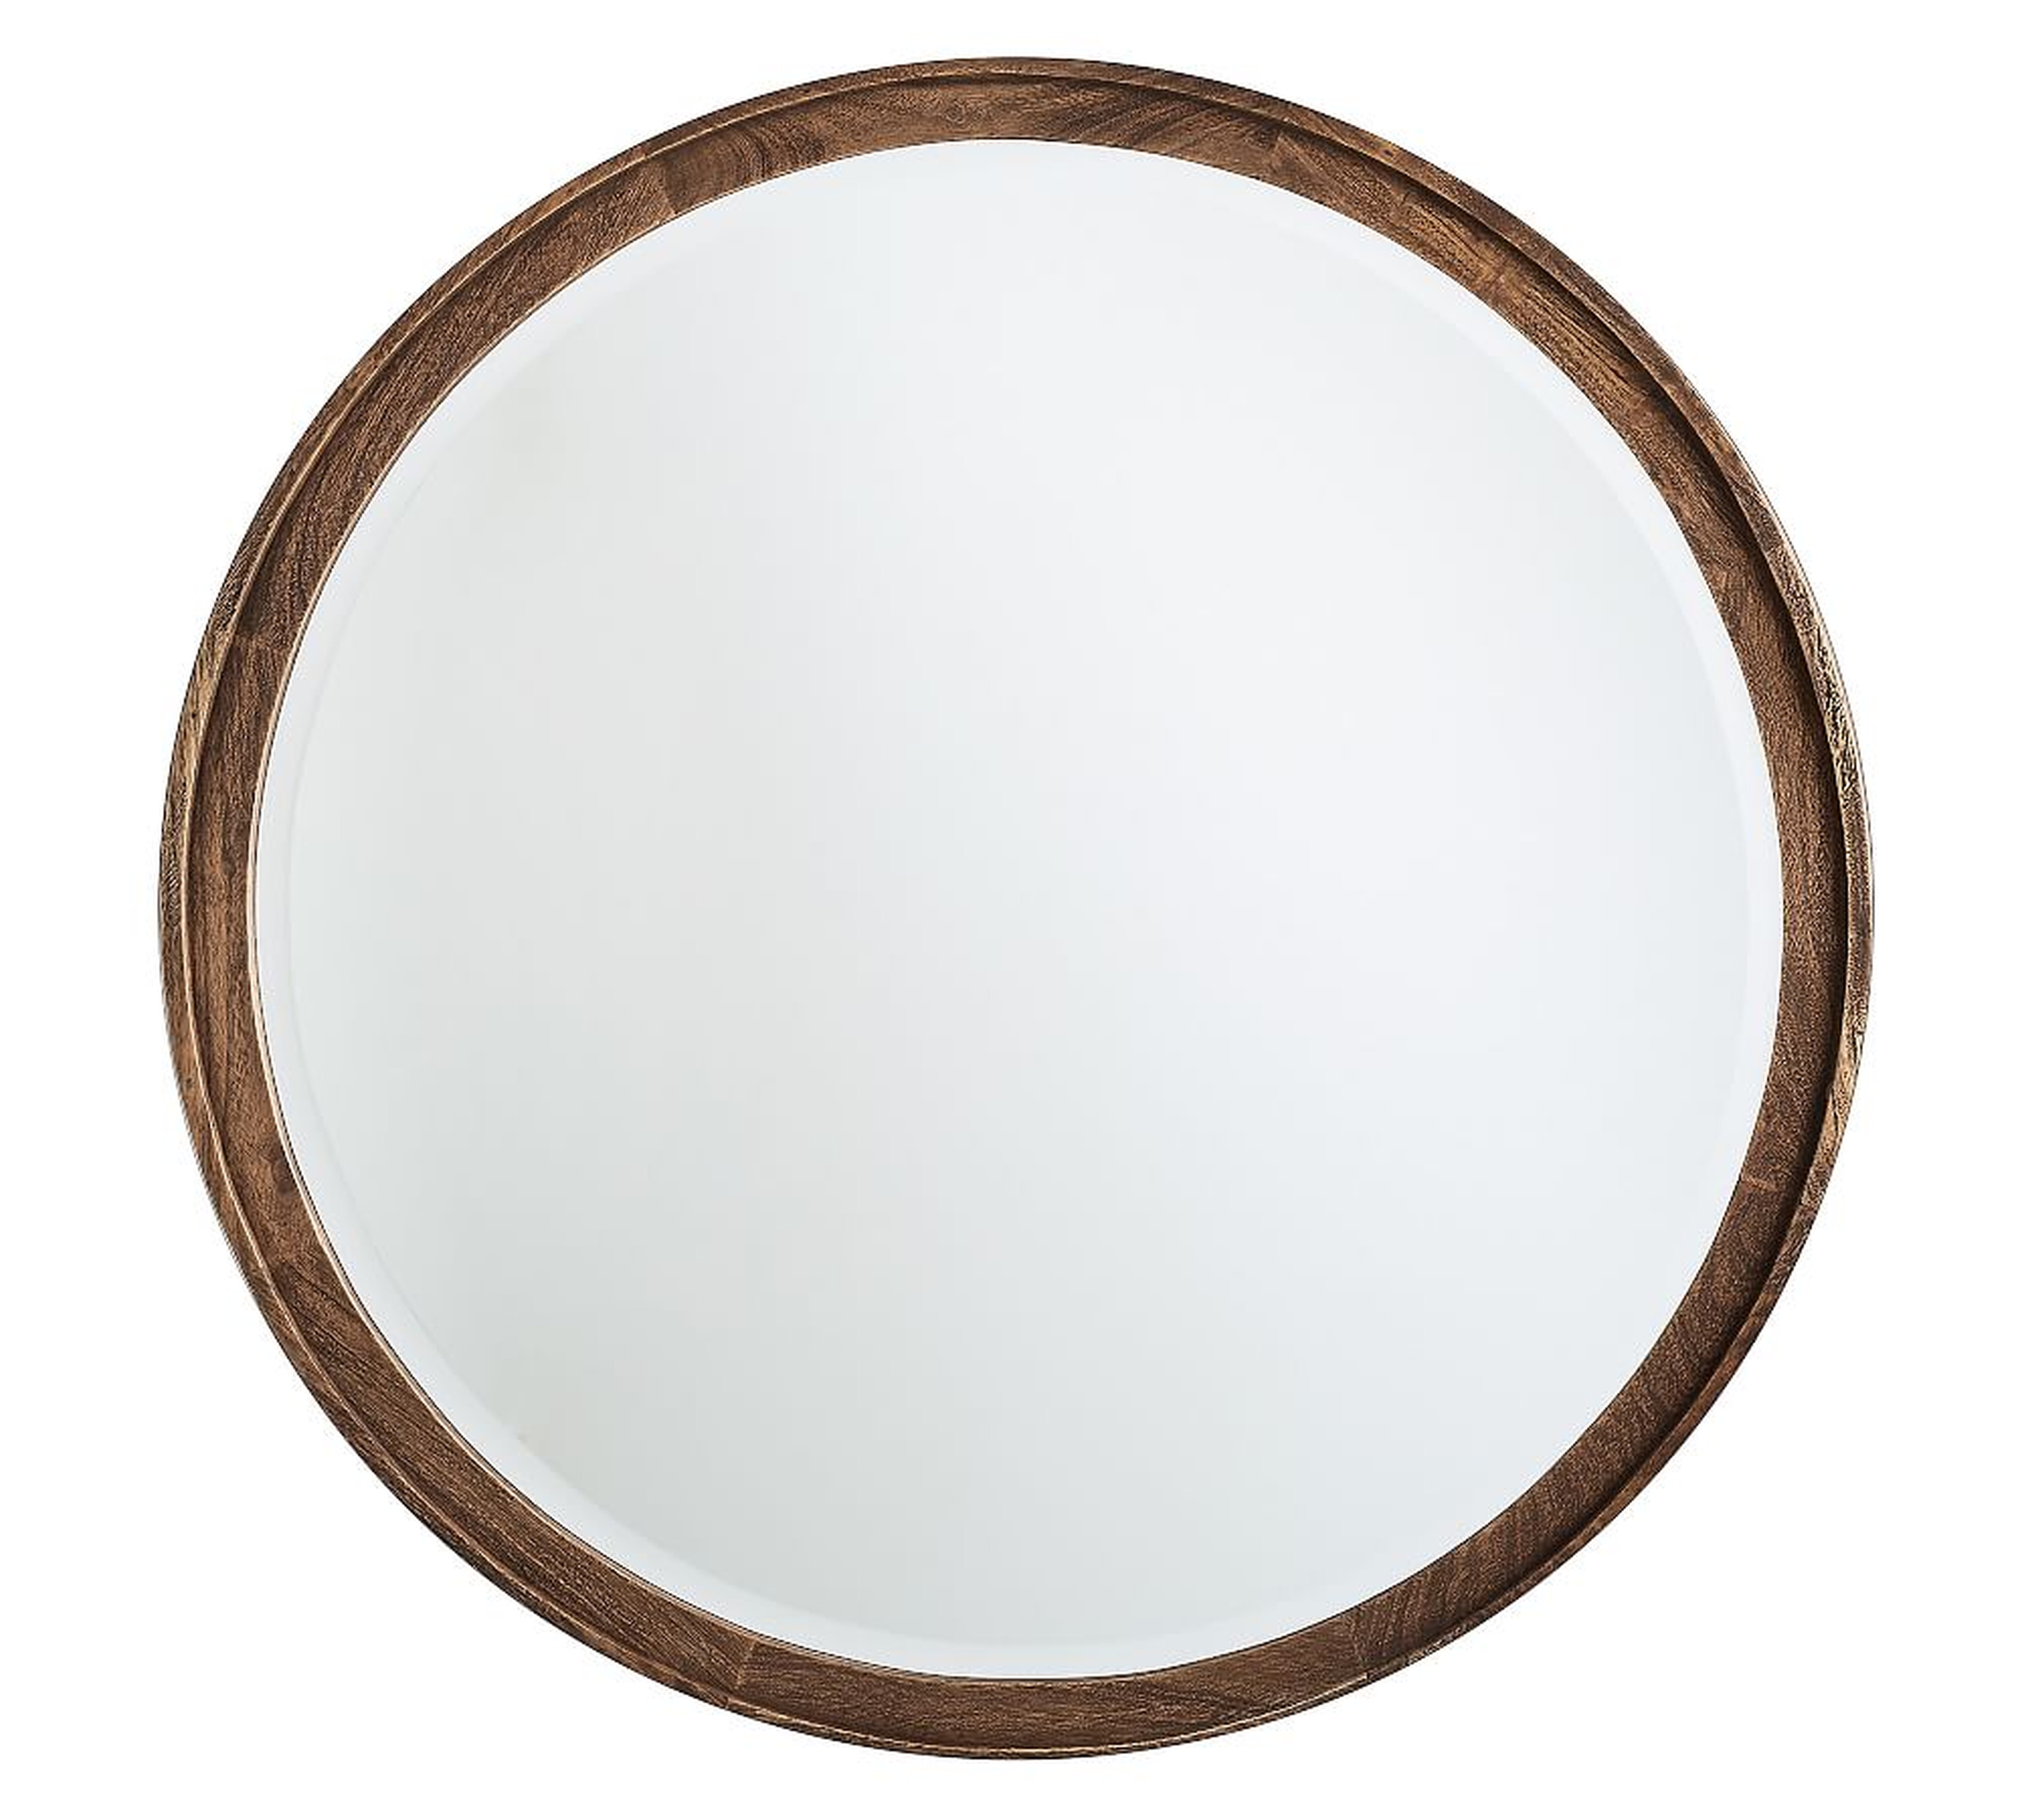 Campbell Wood Round Mirror - 32" x 32" - Pottery Barn